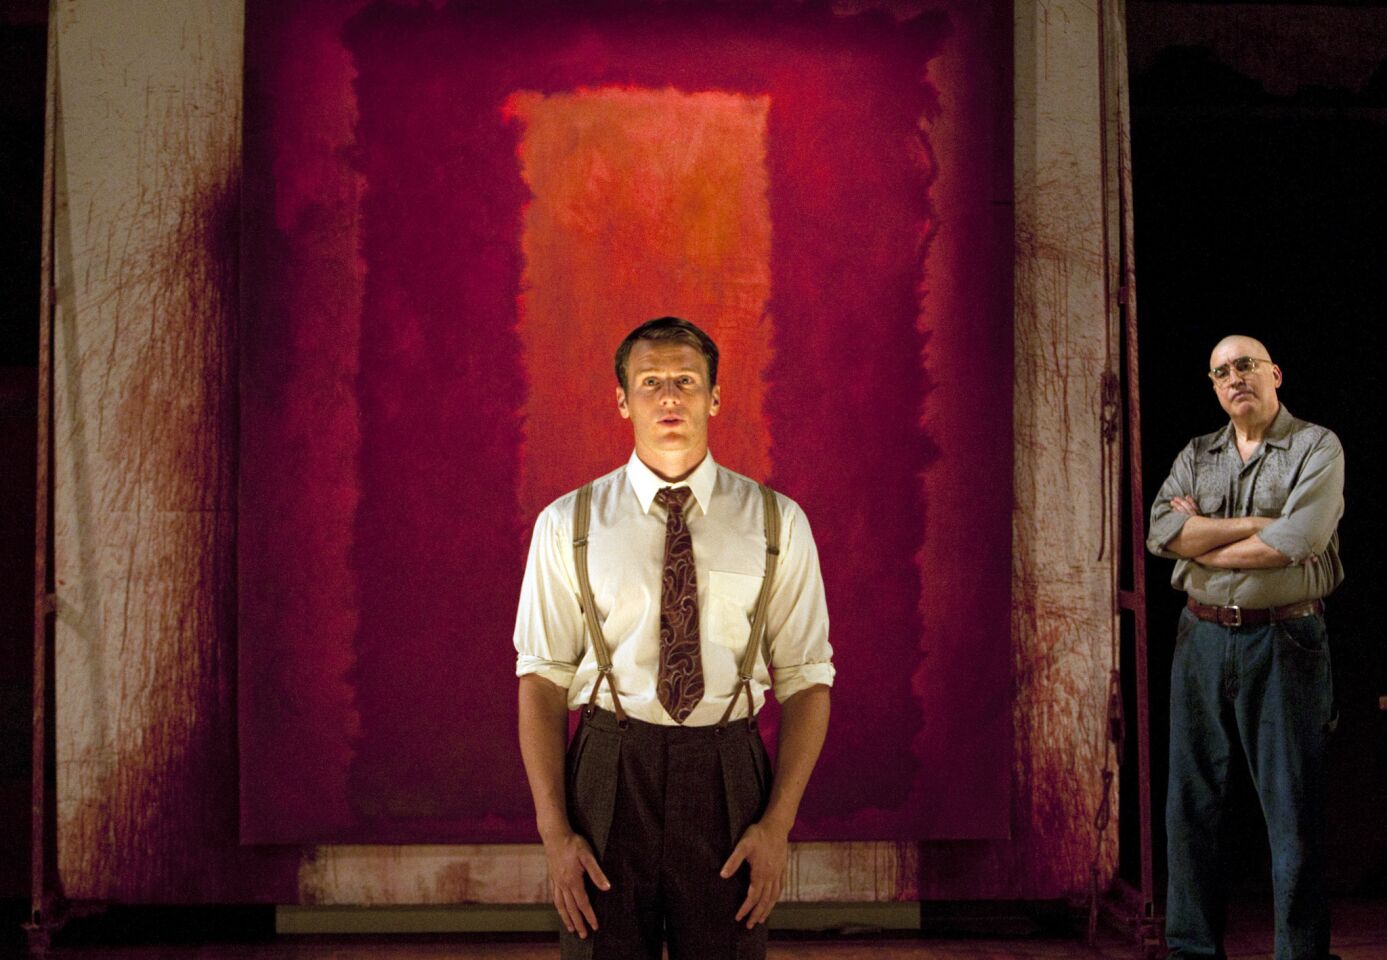 Arts and culture in pictures by The Times | Jonathan Groff and Alfred Molina in 'Red'